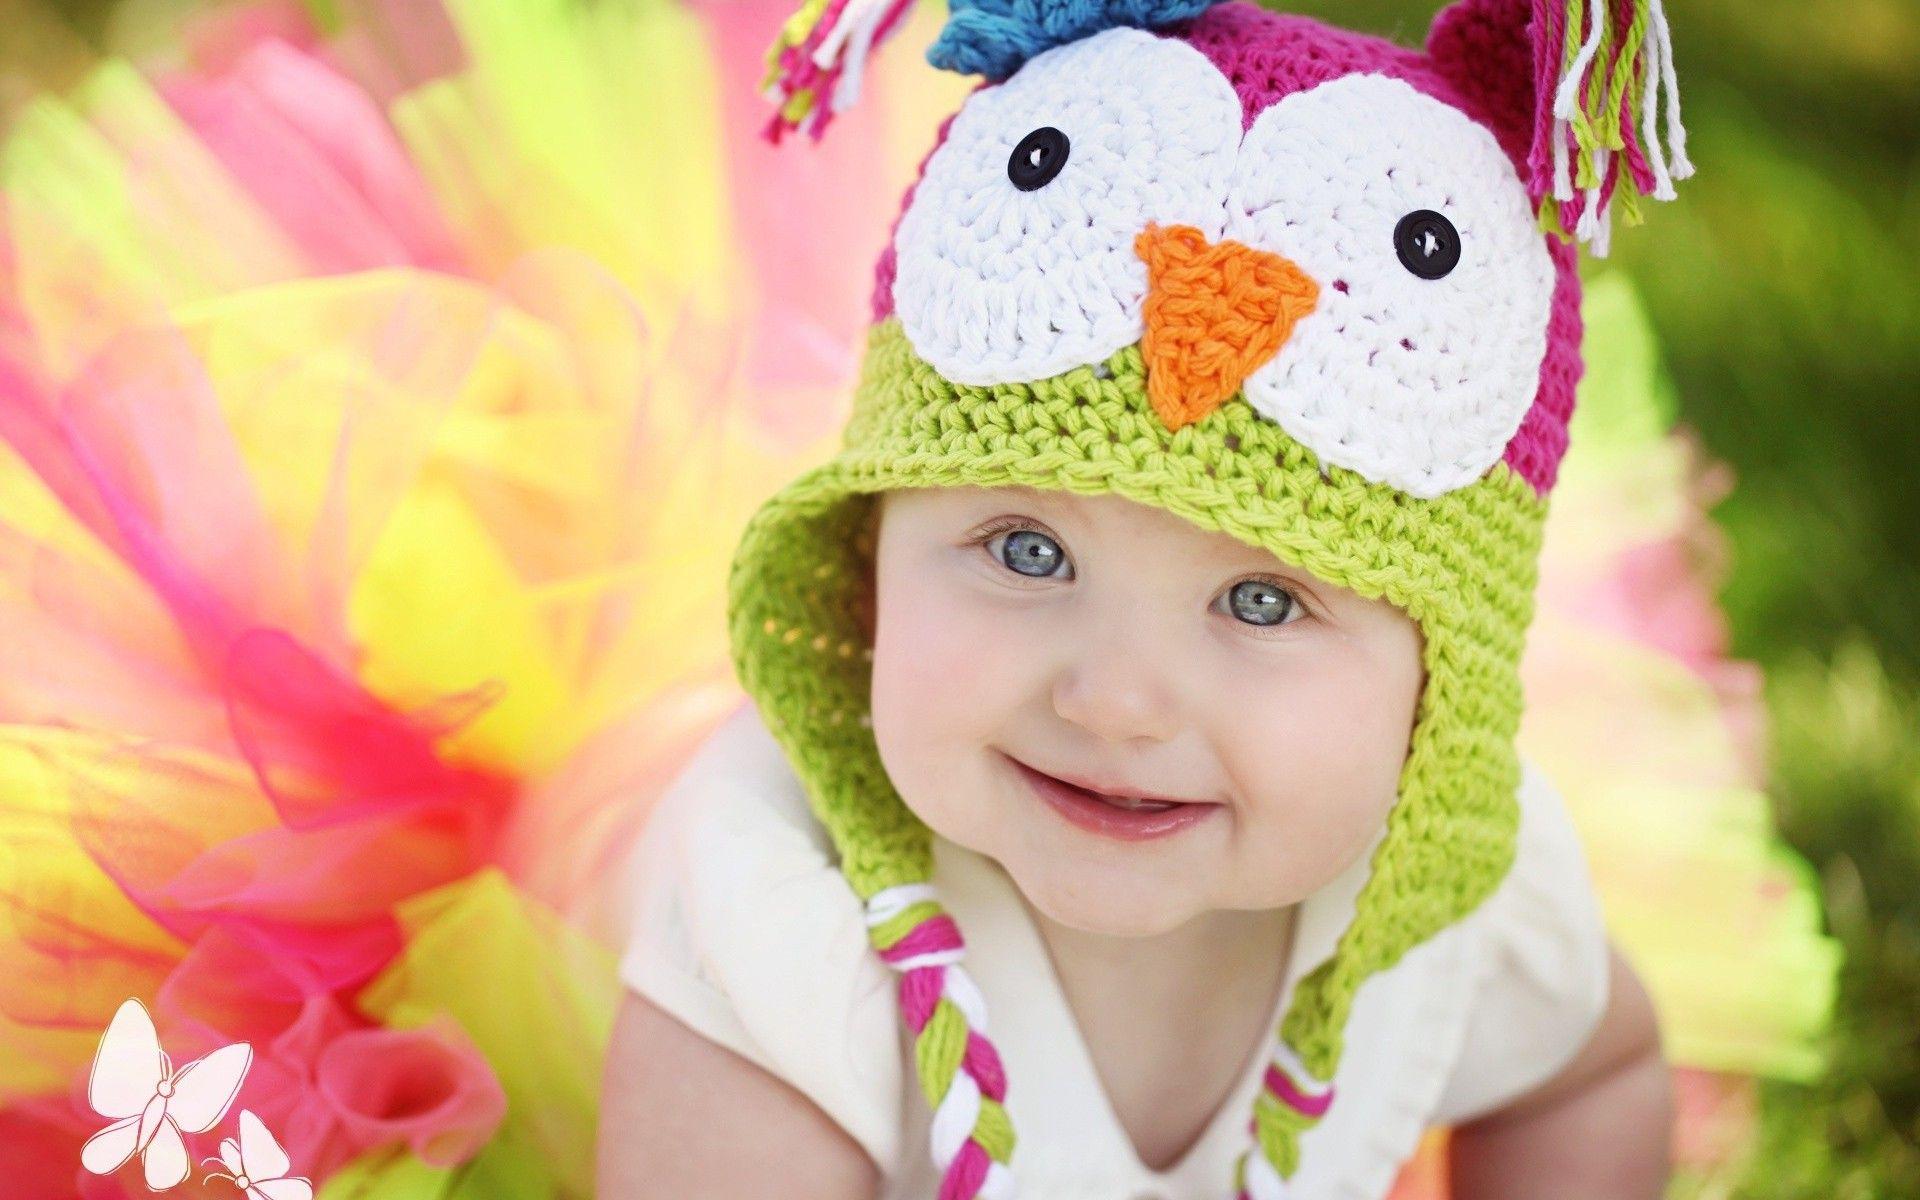 Download Cute Baby Image